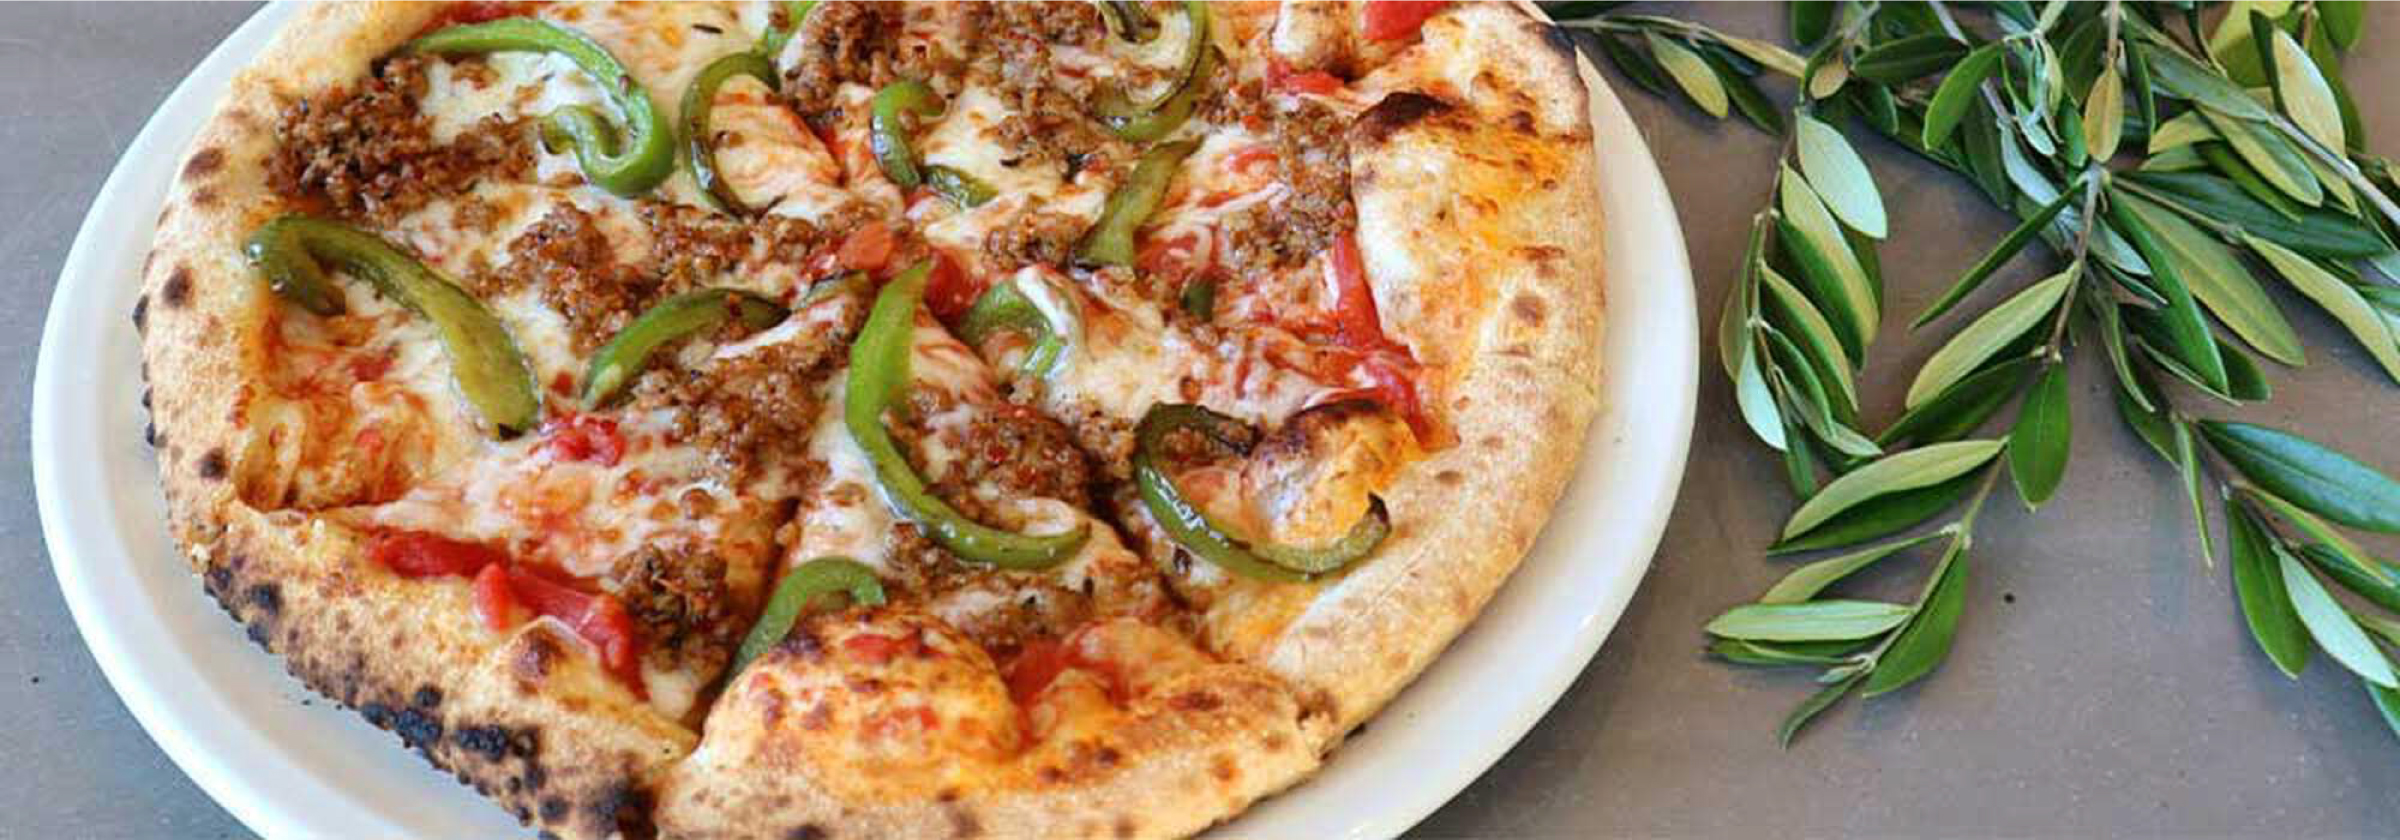 Italian Sausage and Green Pepper Pizza.